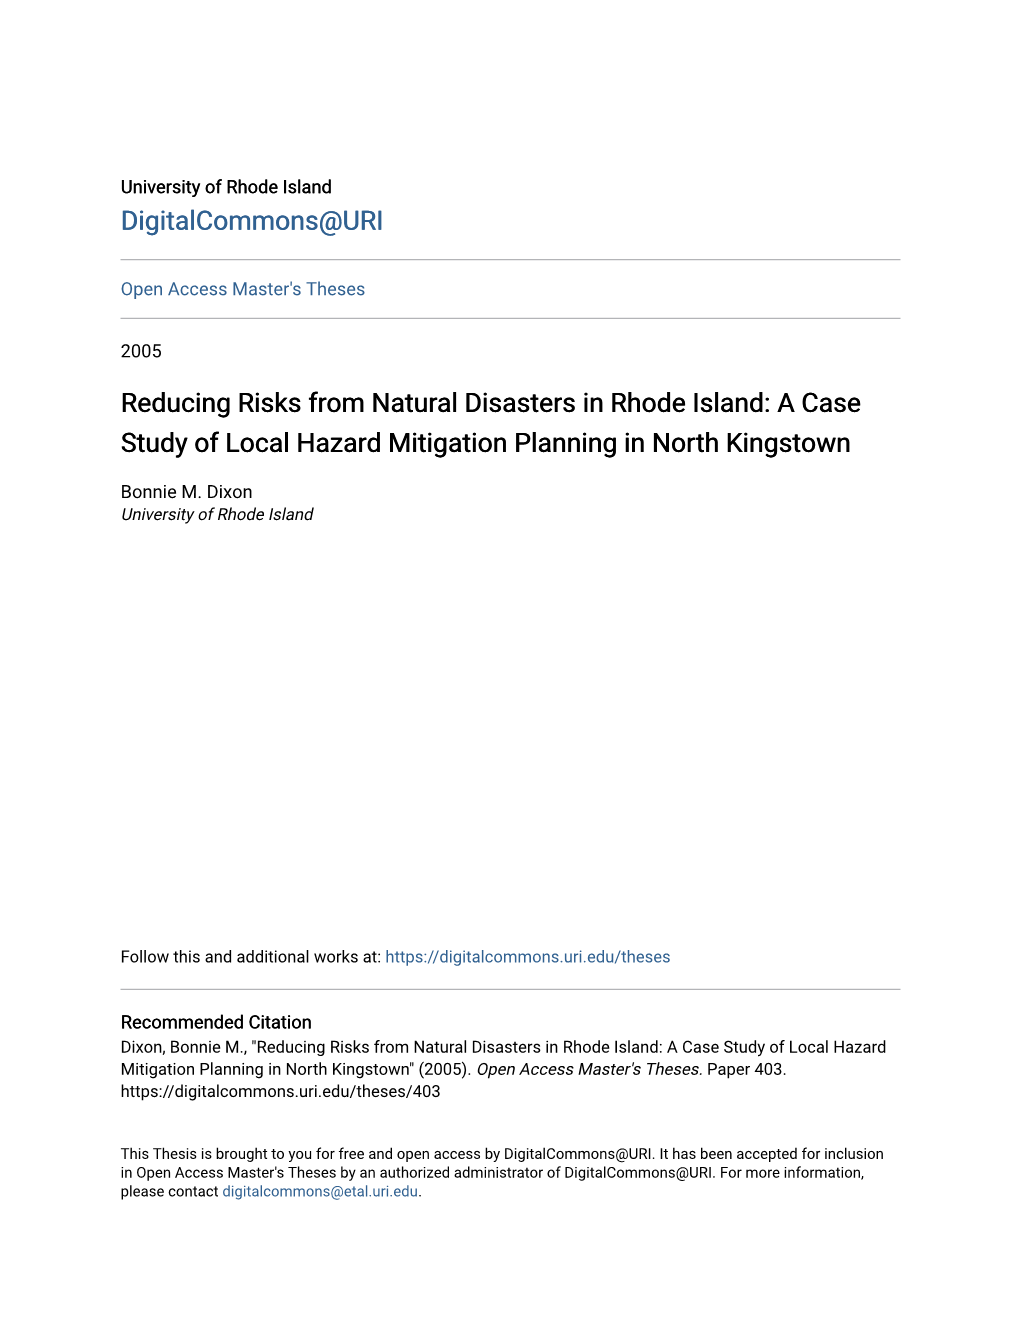 Reducing Risks from Natural Disasters in Rhode Island: a Case Study of Local Hazard Mitigation Planning in North Kingstown